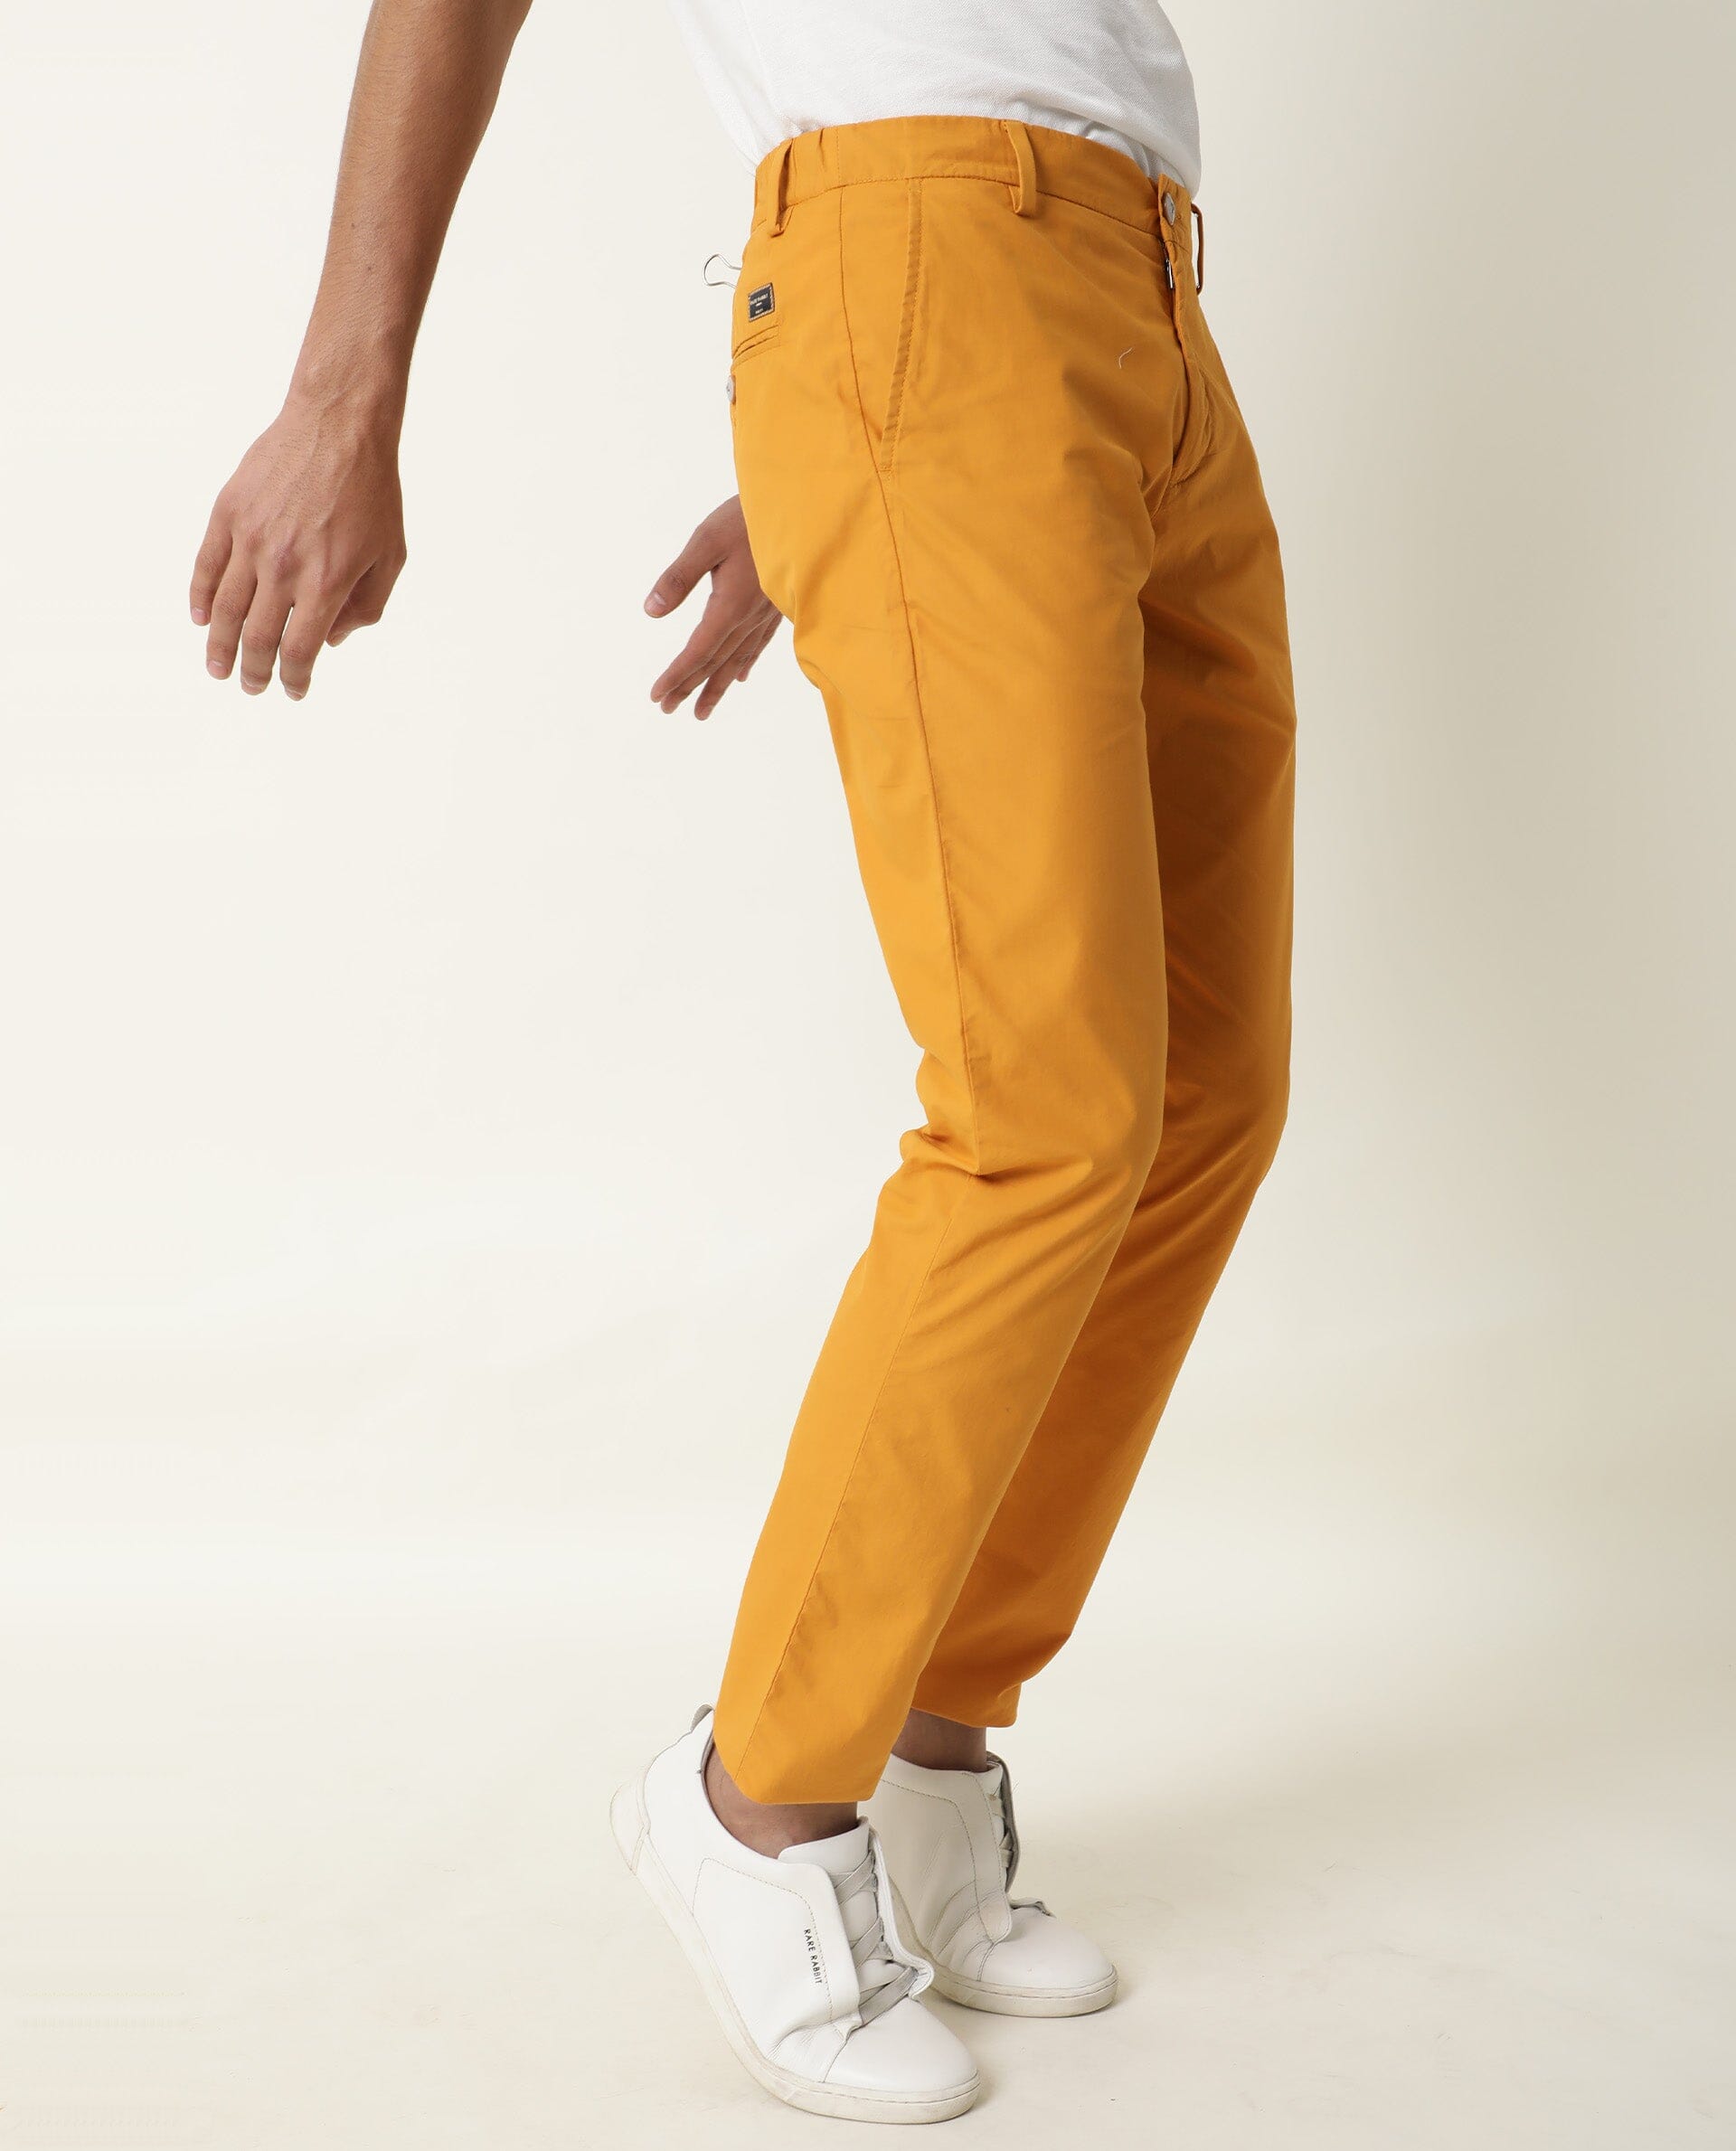 Mustard Trousers For Men  Buy Mustard Trousers For Men online in India